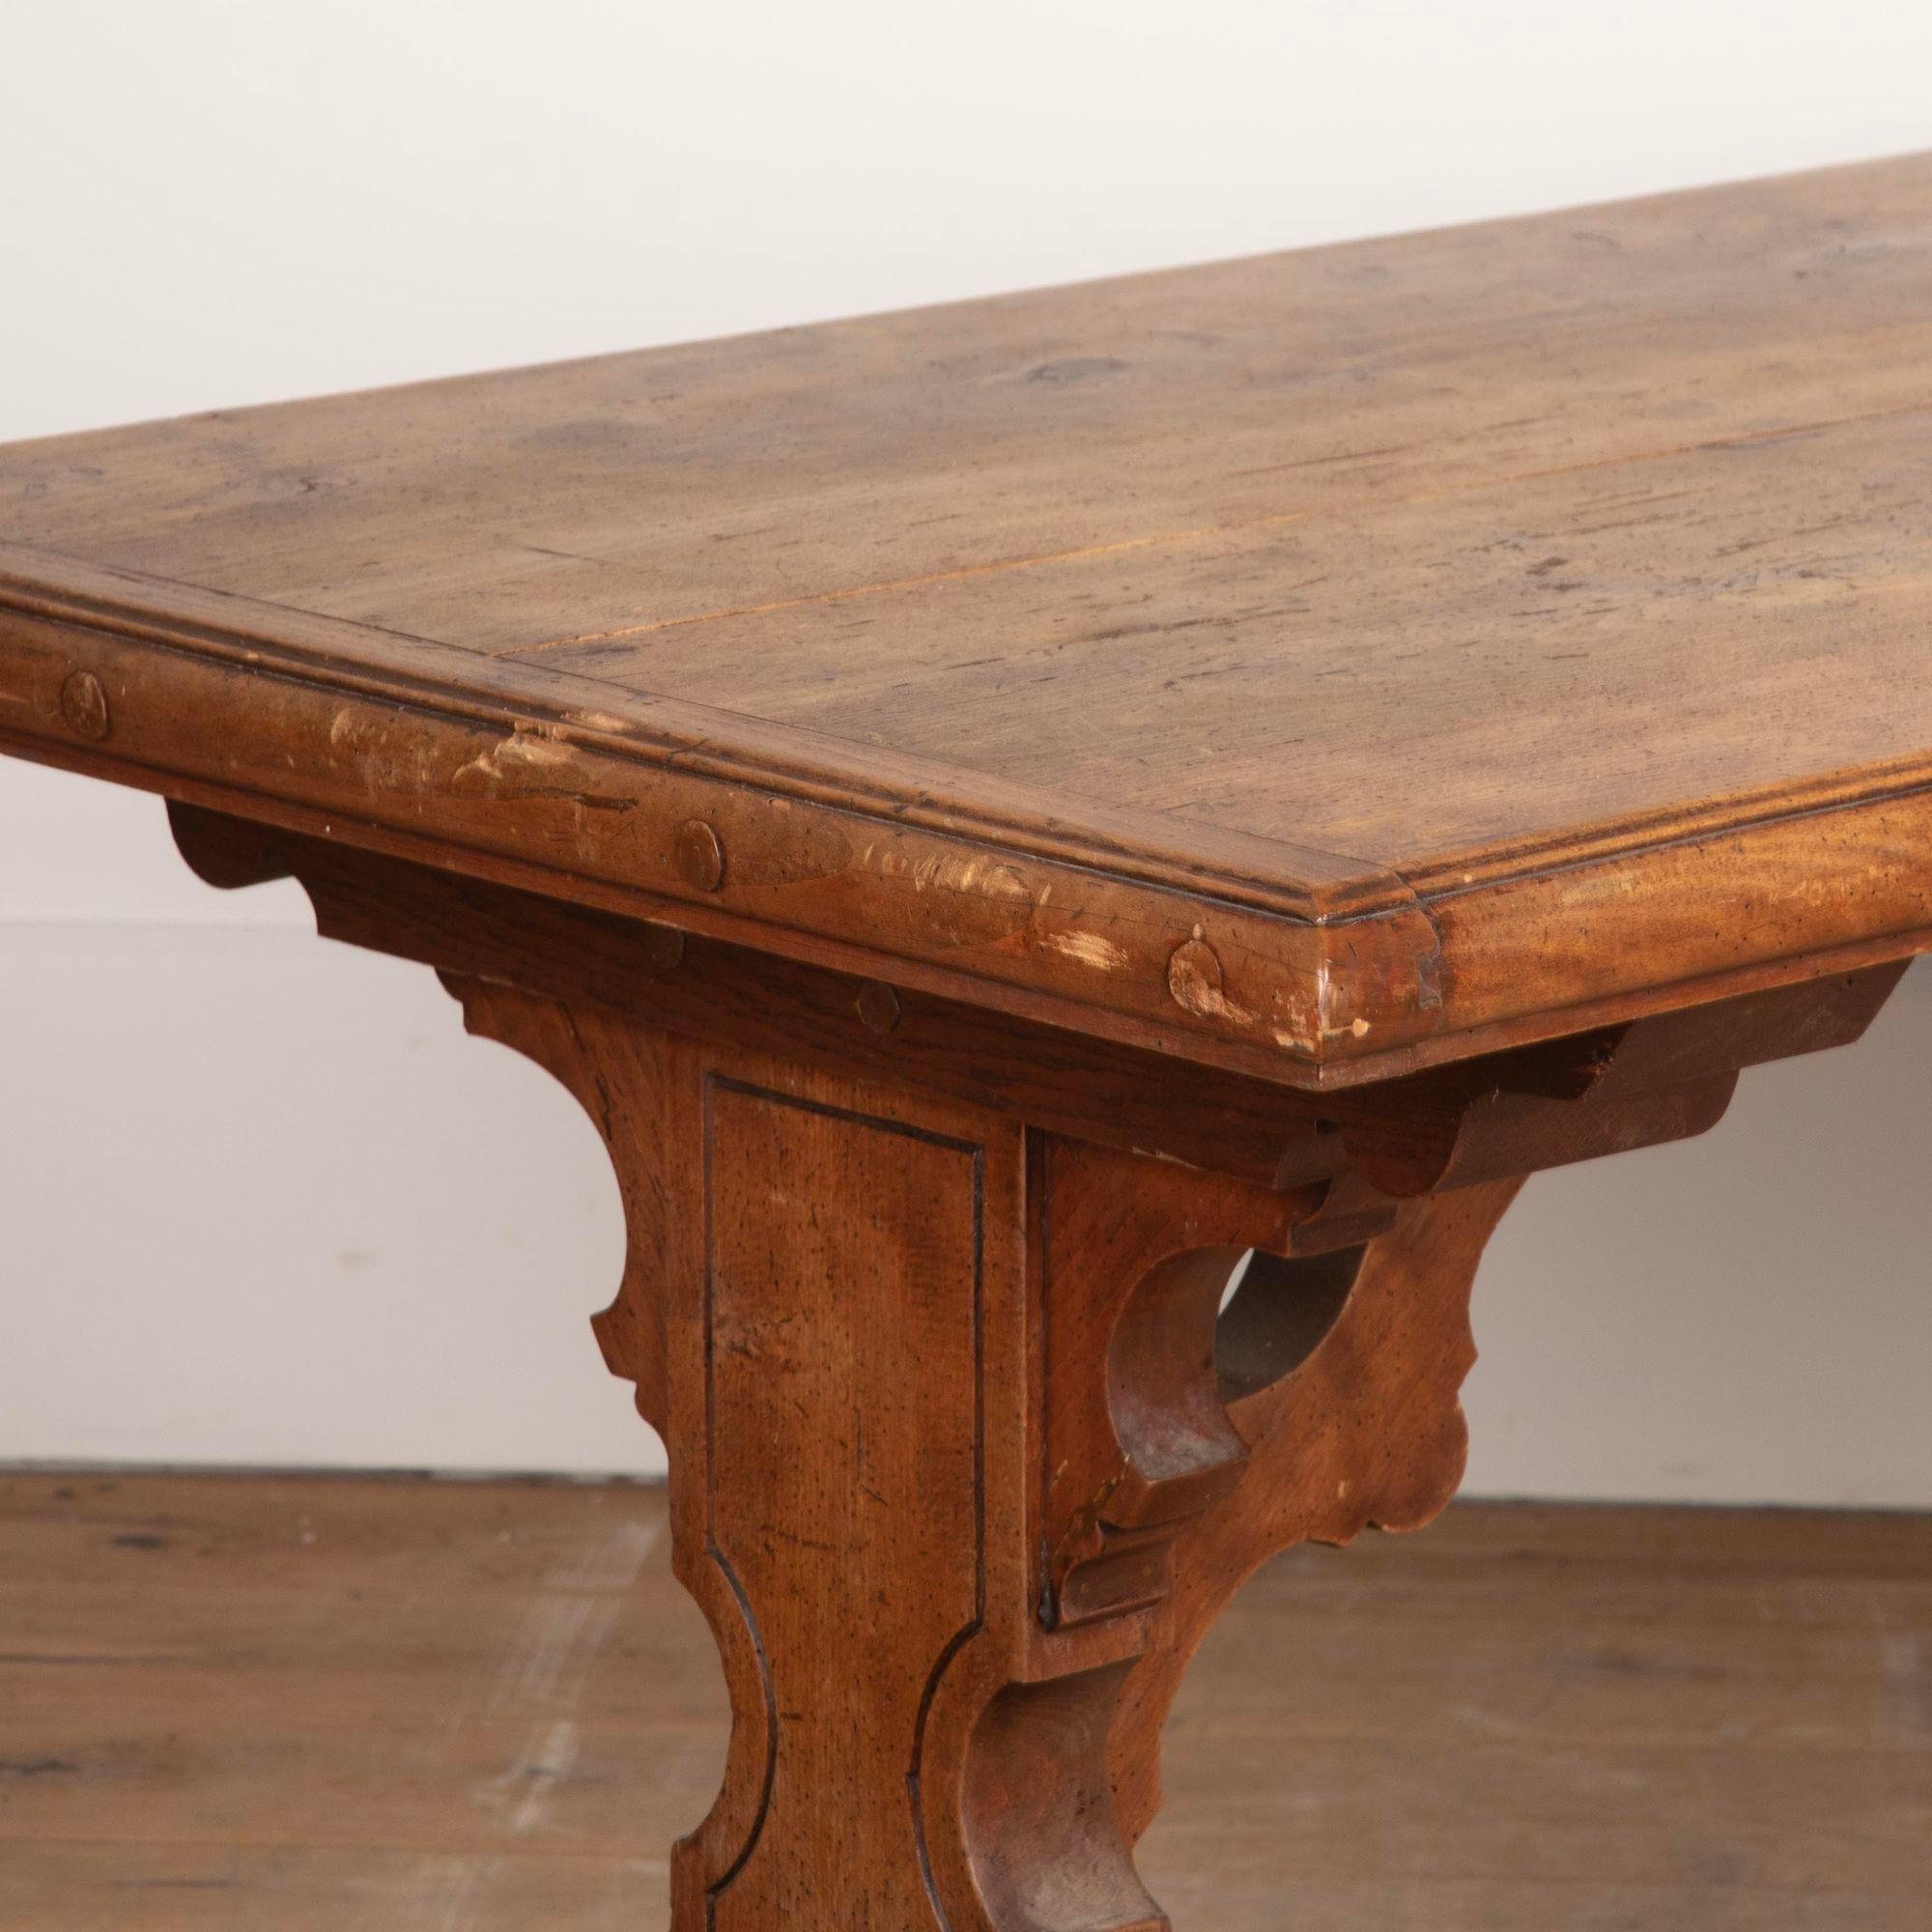 19th century French fruitwood trestle table.
Dating to circa 1800, this table features two drawers and some signs of age related wear.